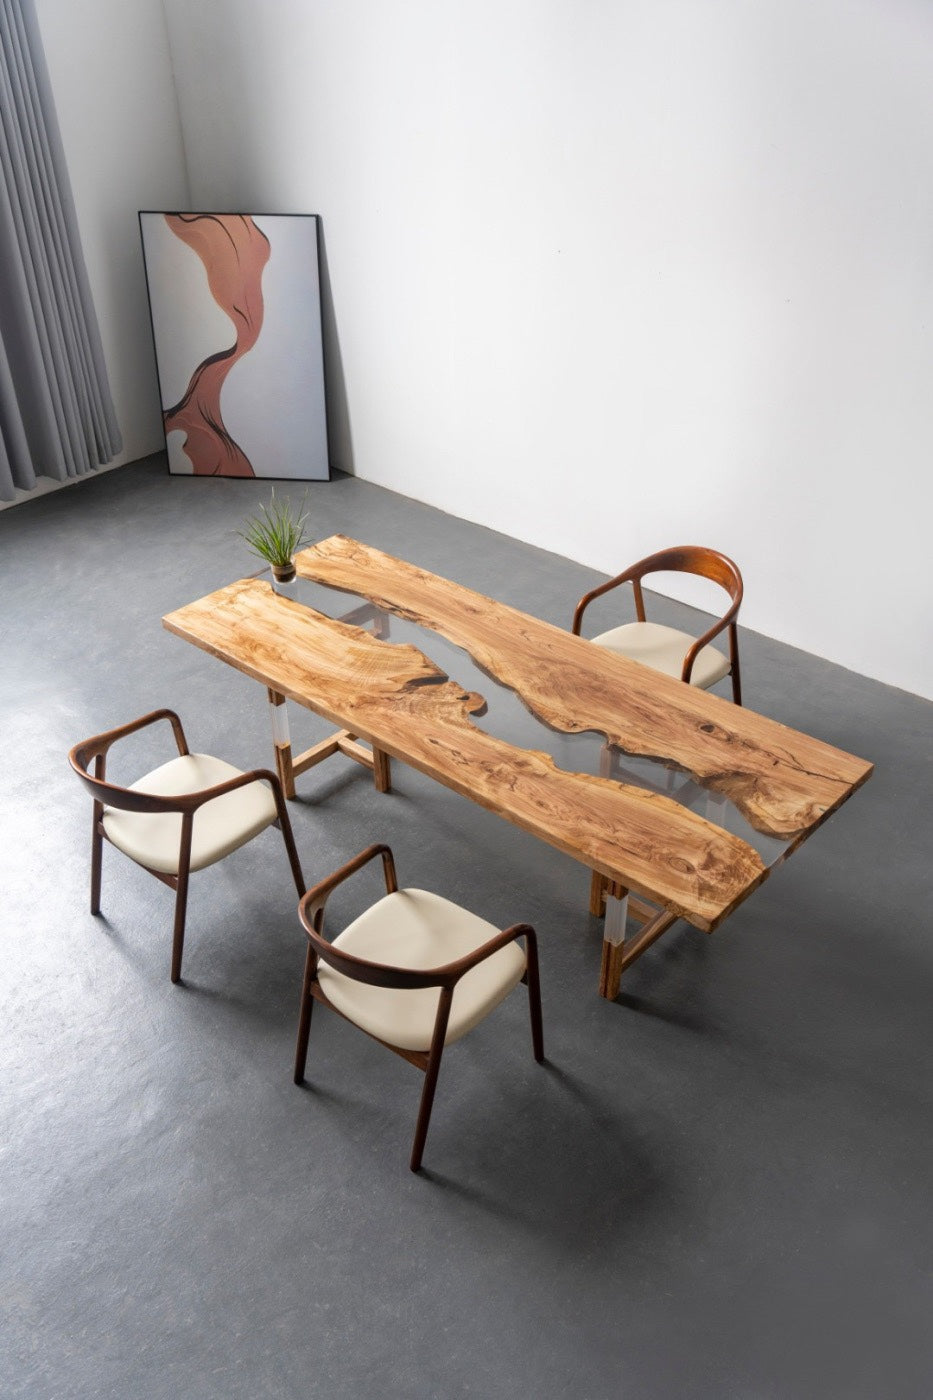 Epoxy Resin Table, Epoxy Resin River Table, Epoxy Resin Dining Table